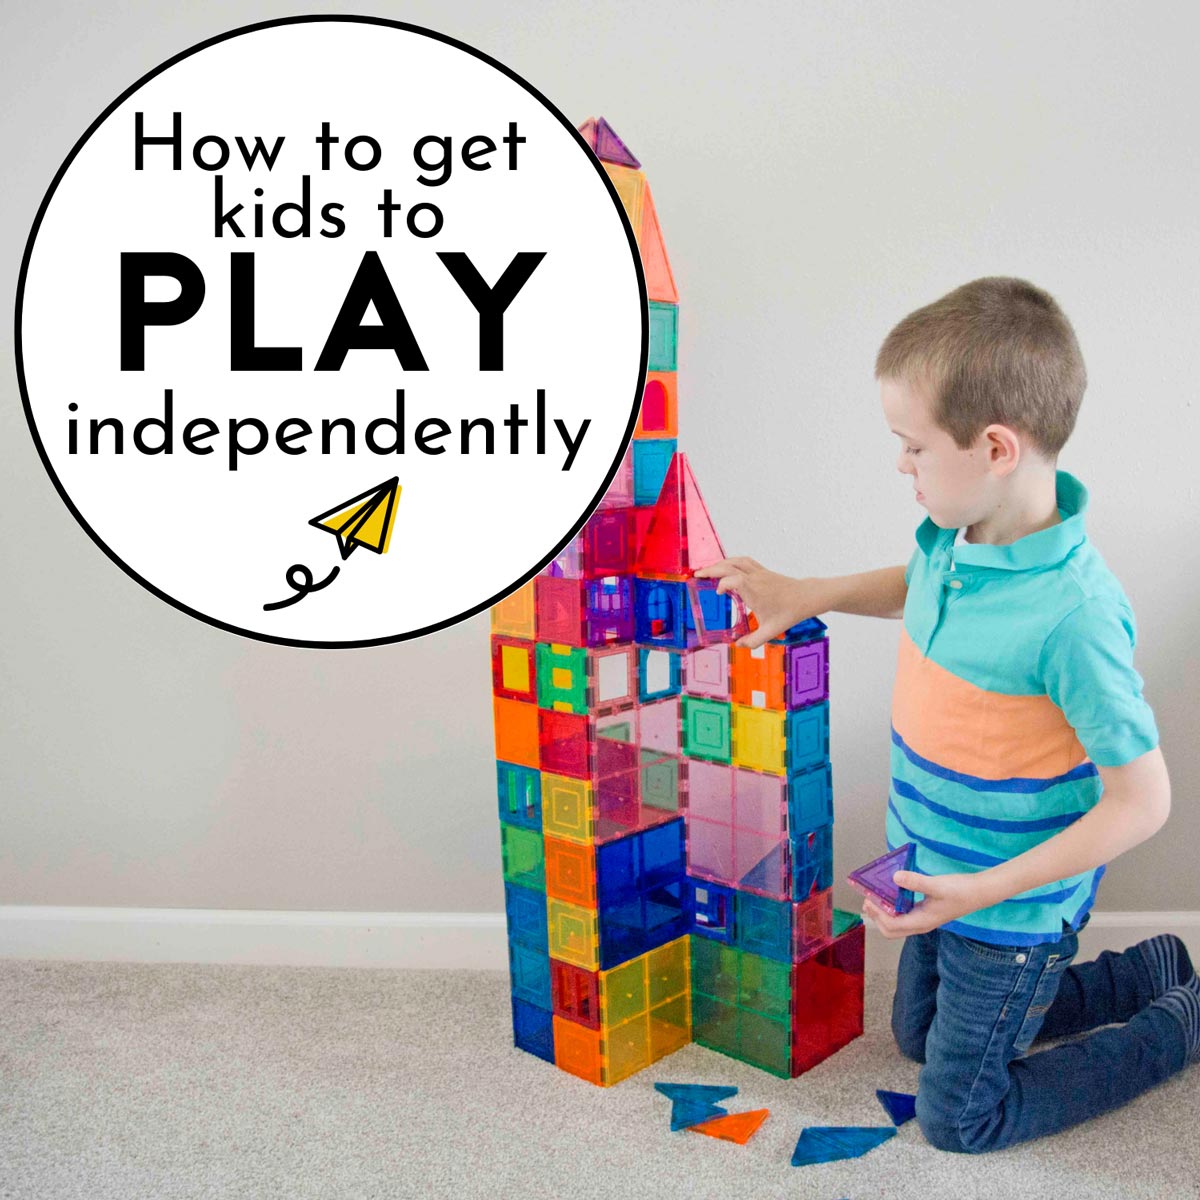 How to get kids to play independently: A child wearing a blue striped shirt is building with magnetic tile.